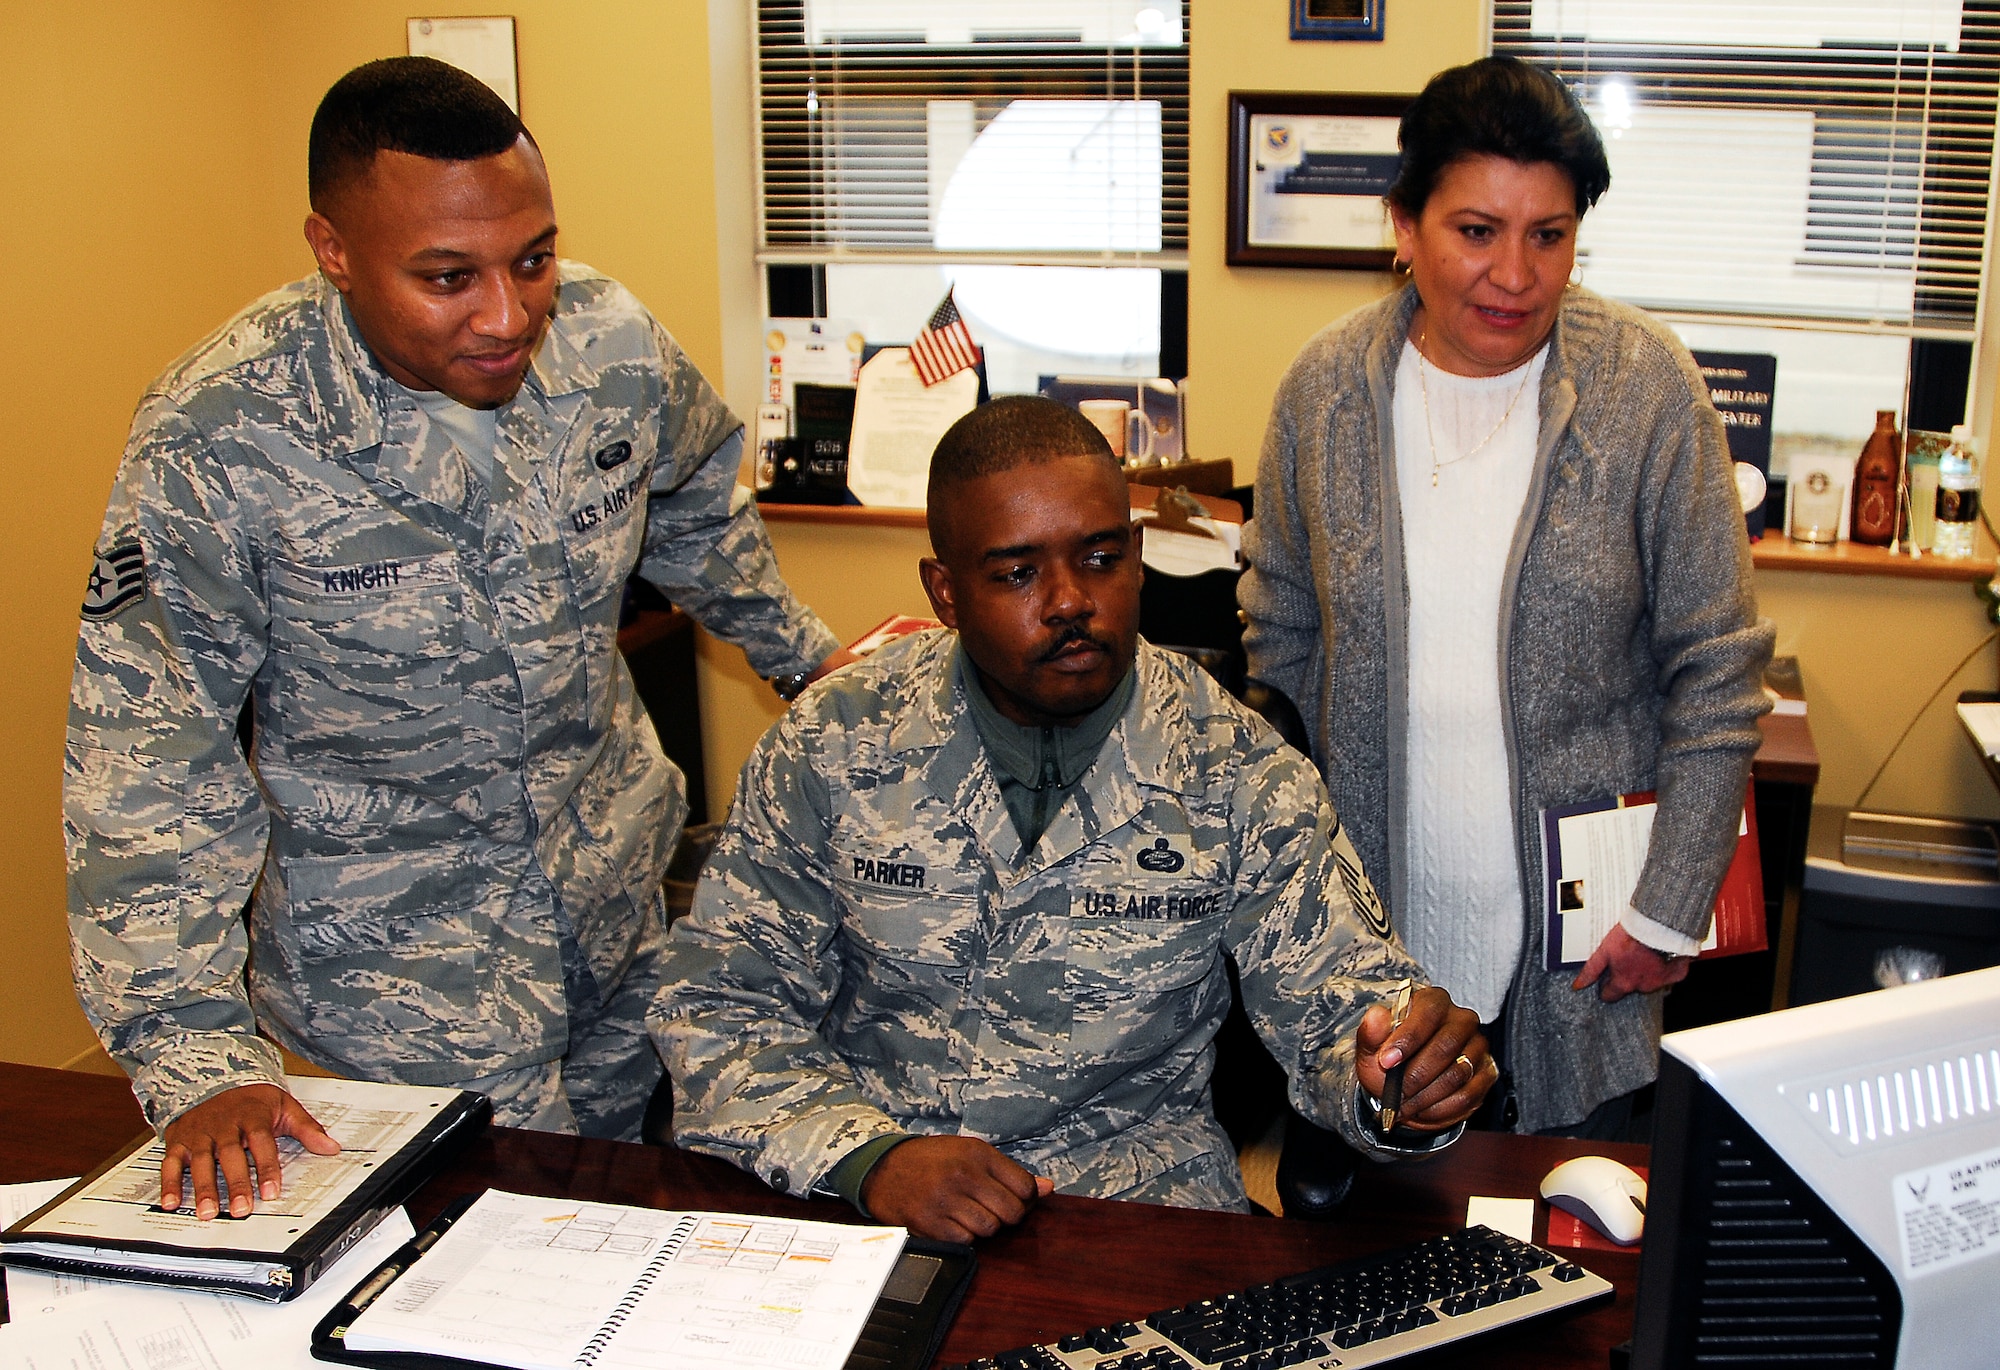 Master Sgt. Roderick Parker, center, recognized as AFRC’s 2010 Education and Traning SNCO, discusses an upcoming UTA schedule with staff members Staff Sgt. Aaron Knight and Master Sgt. Belinda Ray.